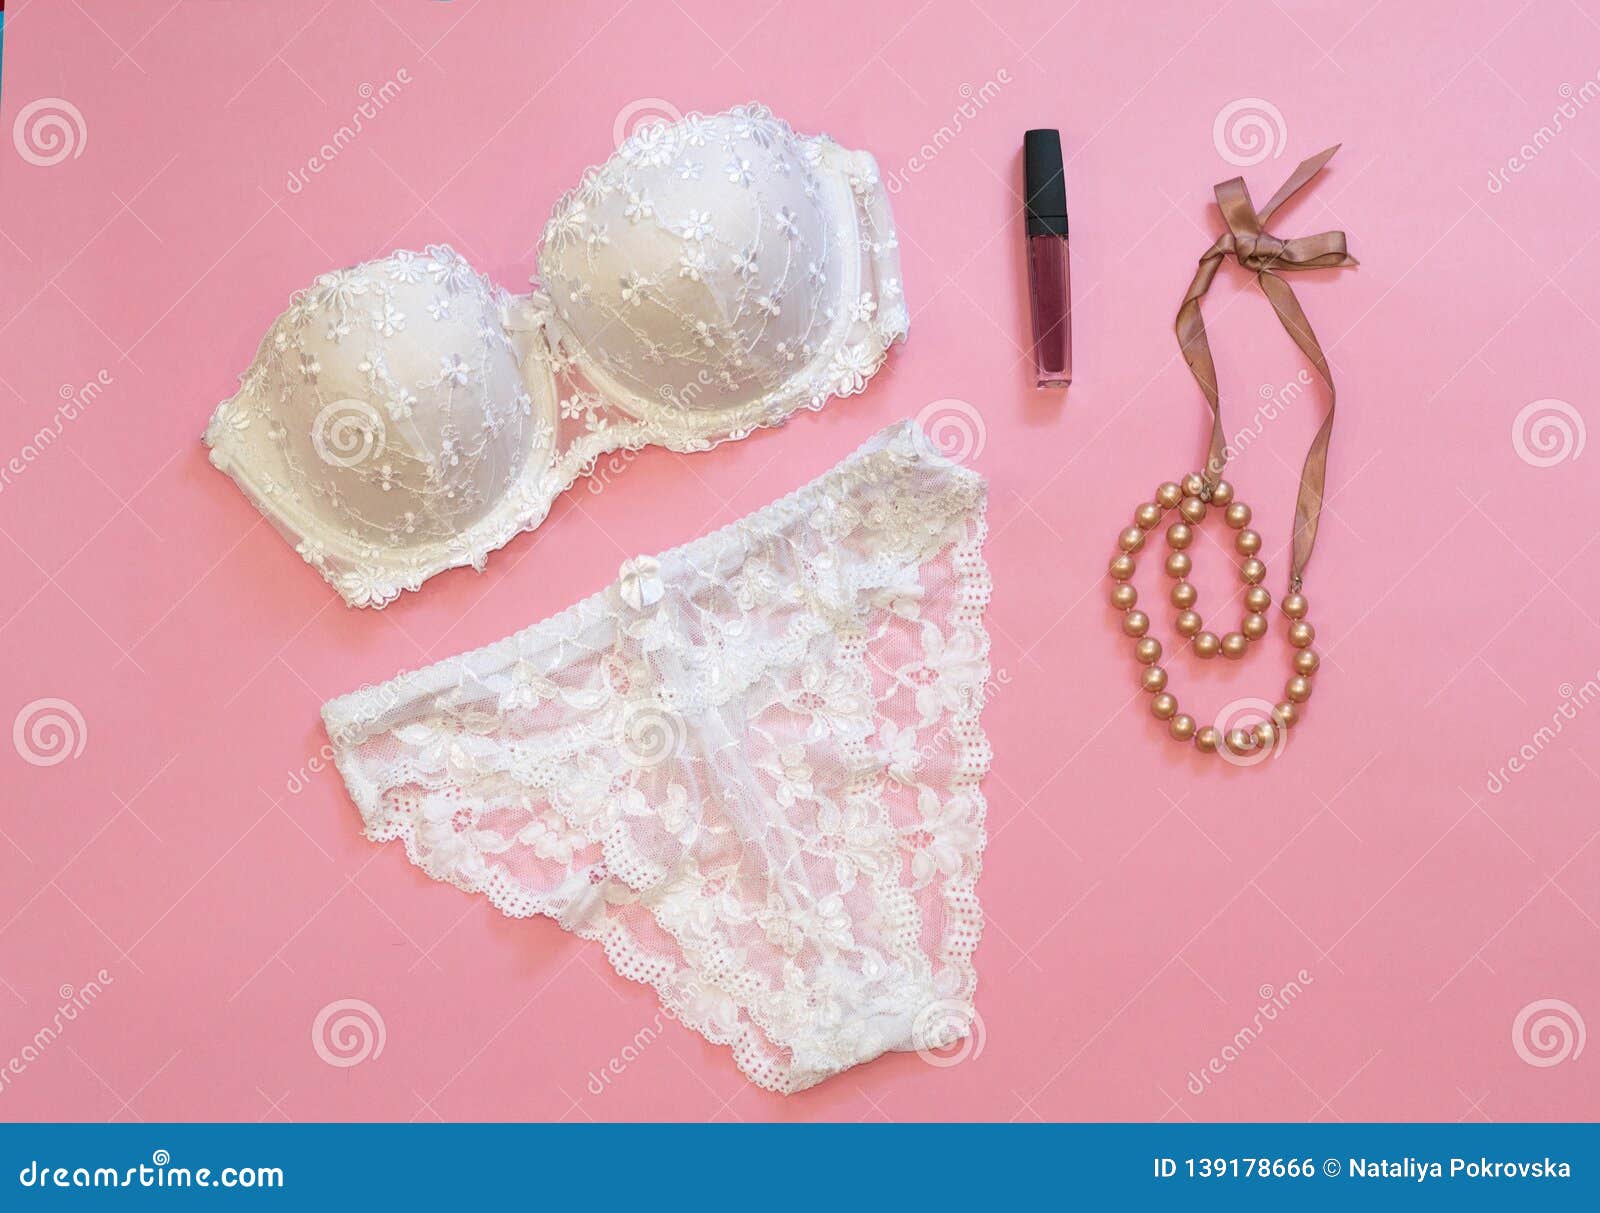 White Lacery Lingerie Near Lipstick and Necklace on Pink Background. Woman  Underwear for Special Occasions Stock Photo - Image of love, lipstick:  139178666